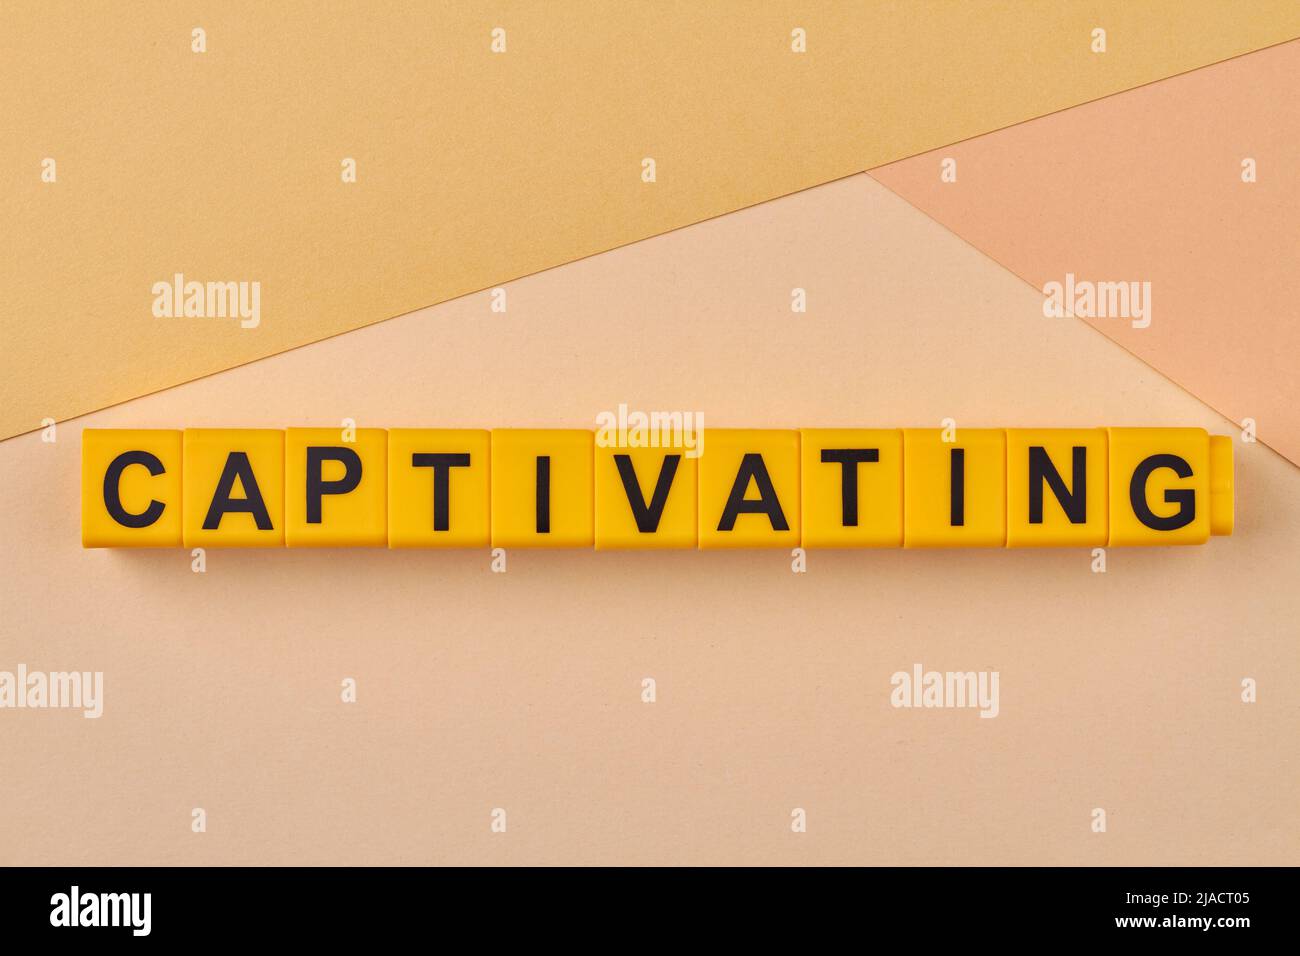 Captivating word written on alphabet blocks on light background close up. Capable of attracting and holding interest, charming. Stock Photo